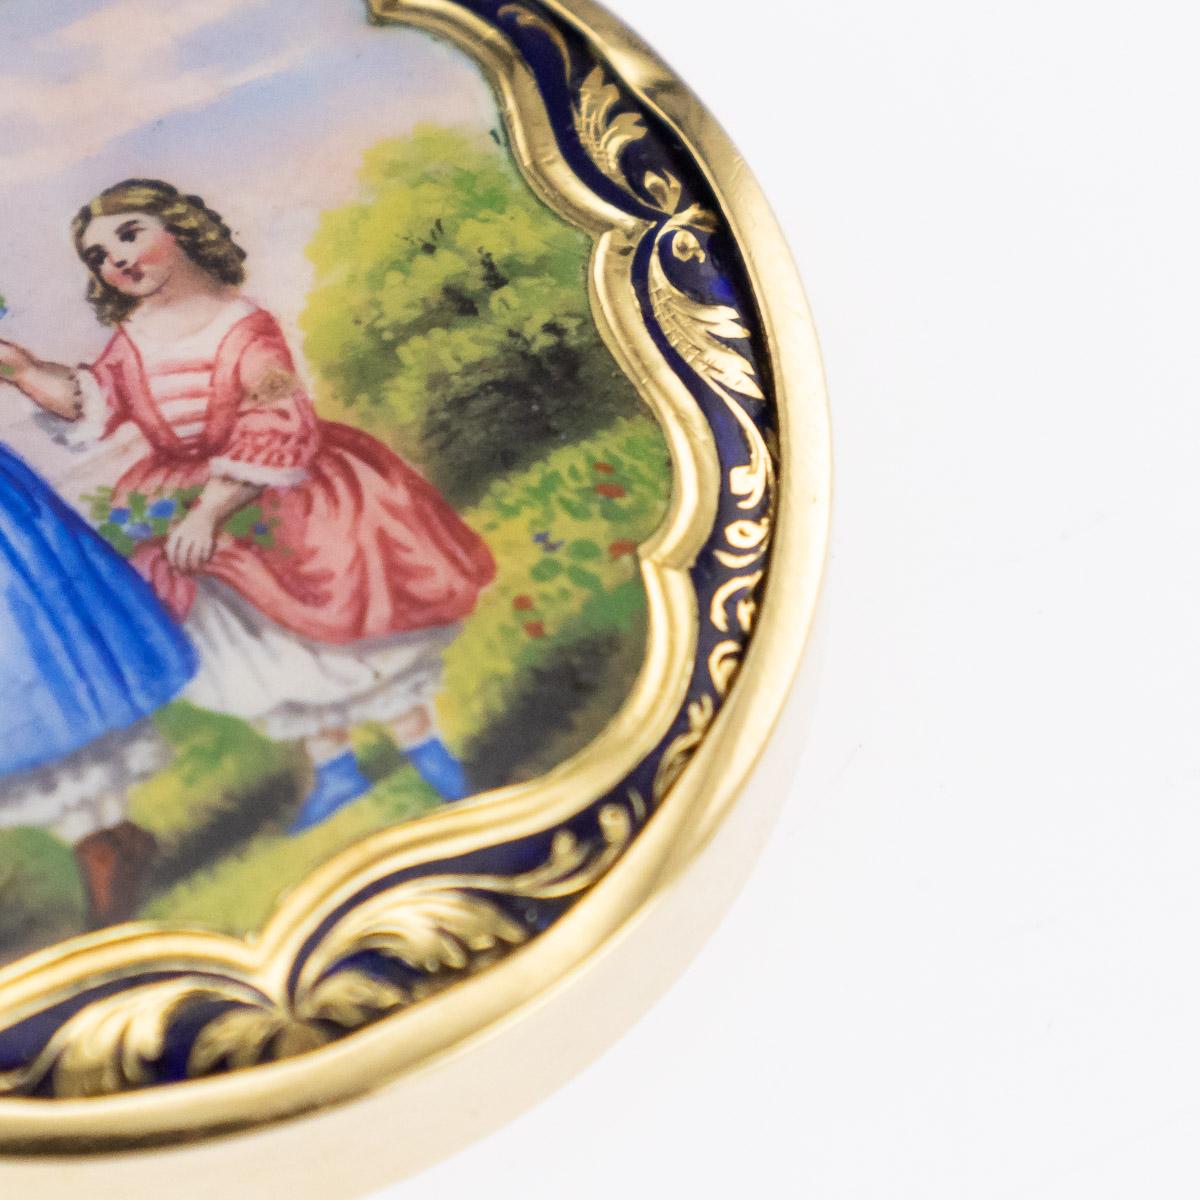 20th Century Russian 14-Karat Gold and Enamel Pill Box, Moscow, circa 1900 For Sale 1